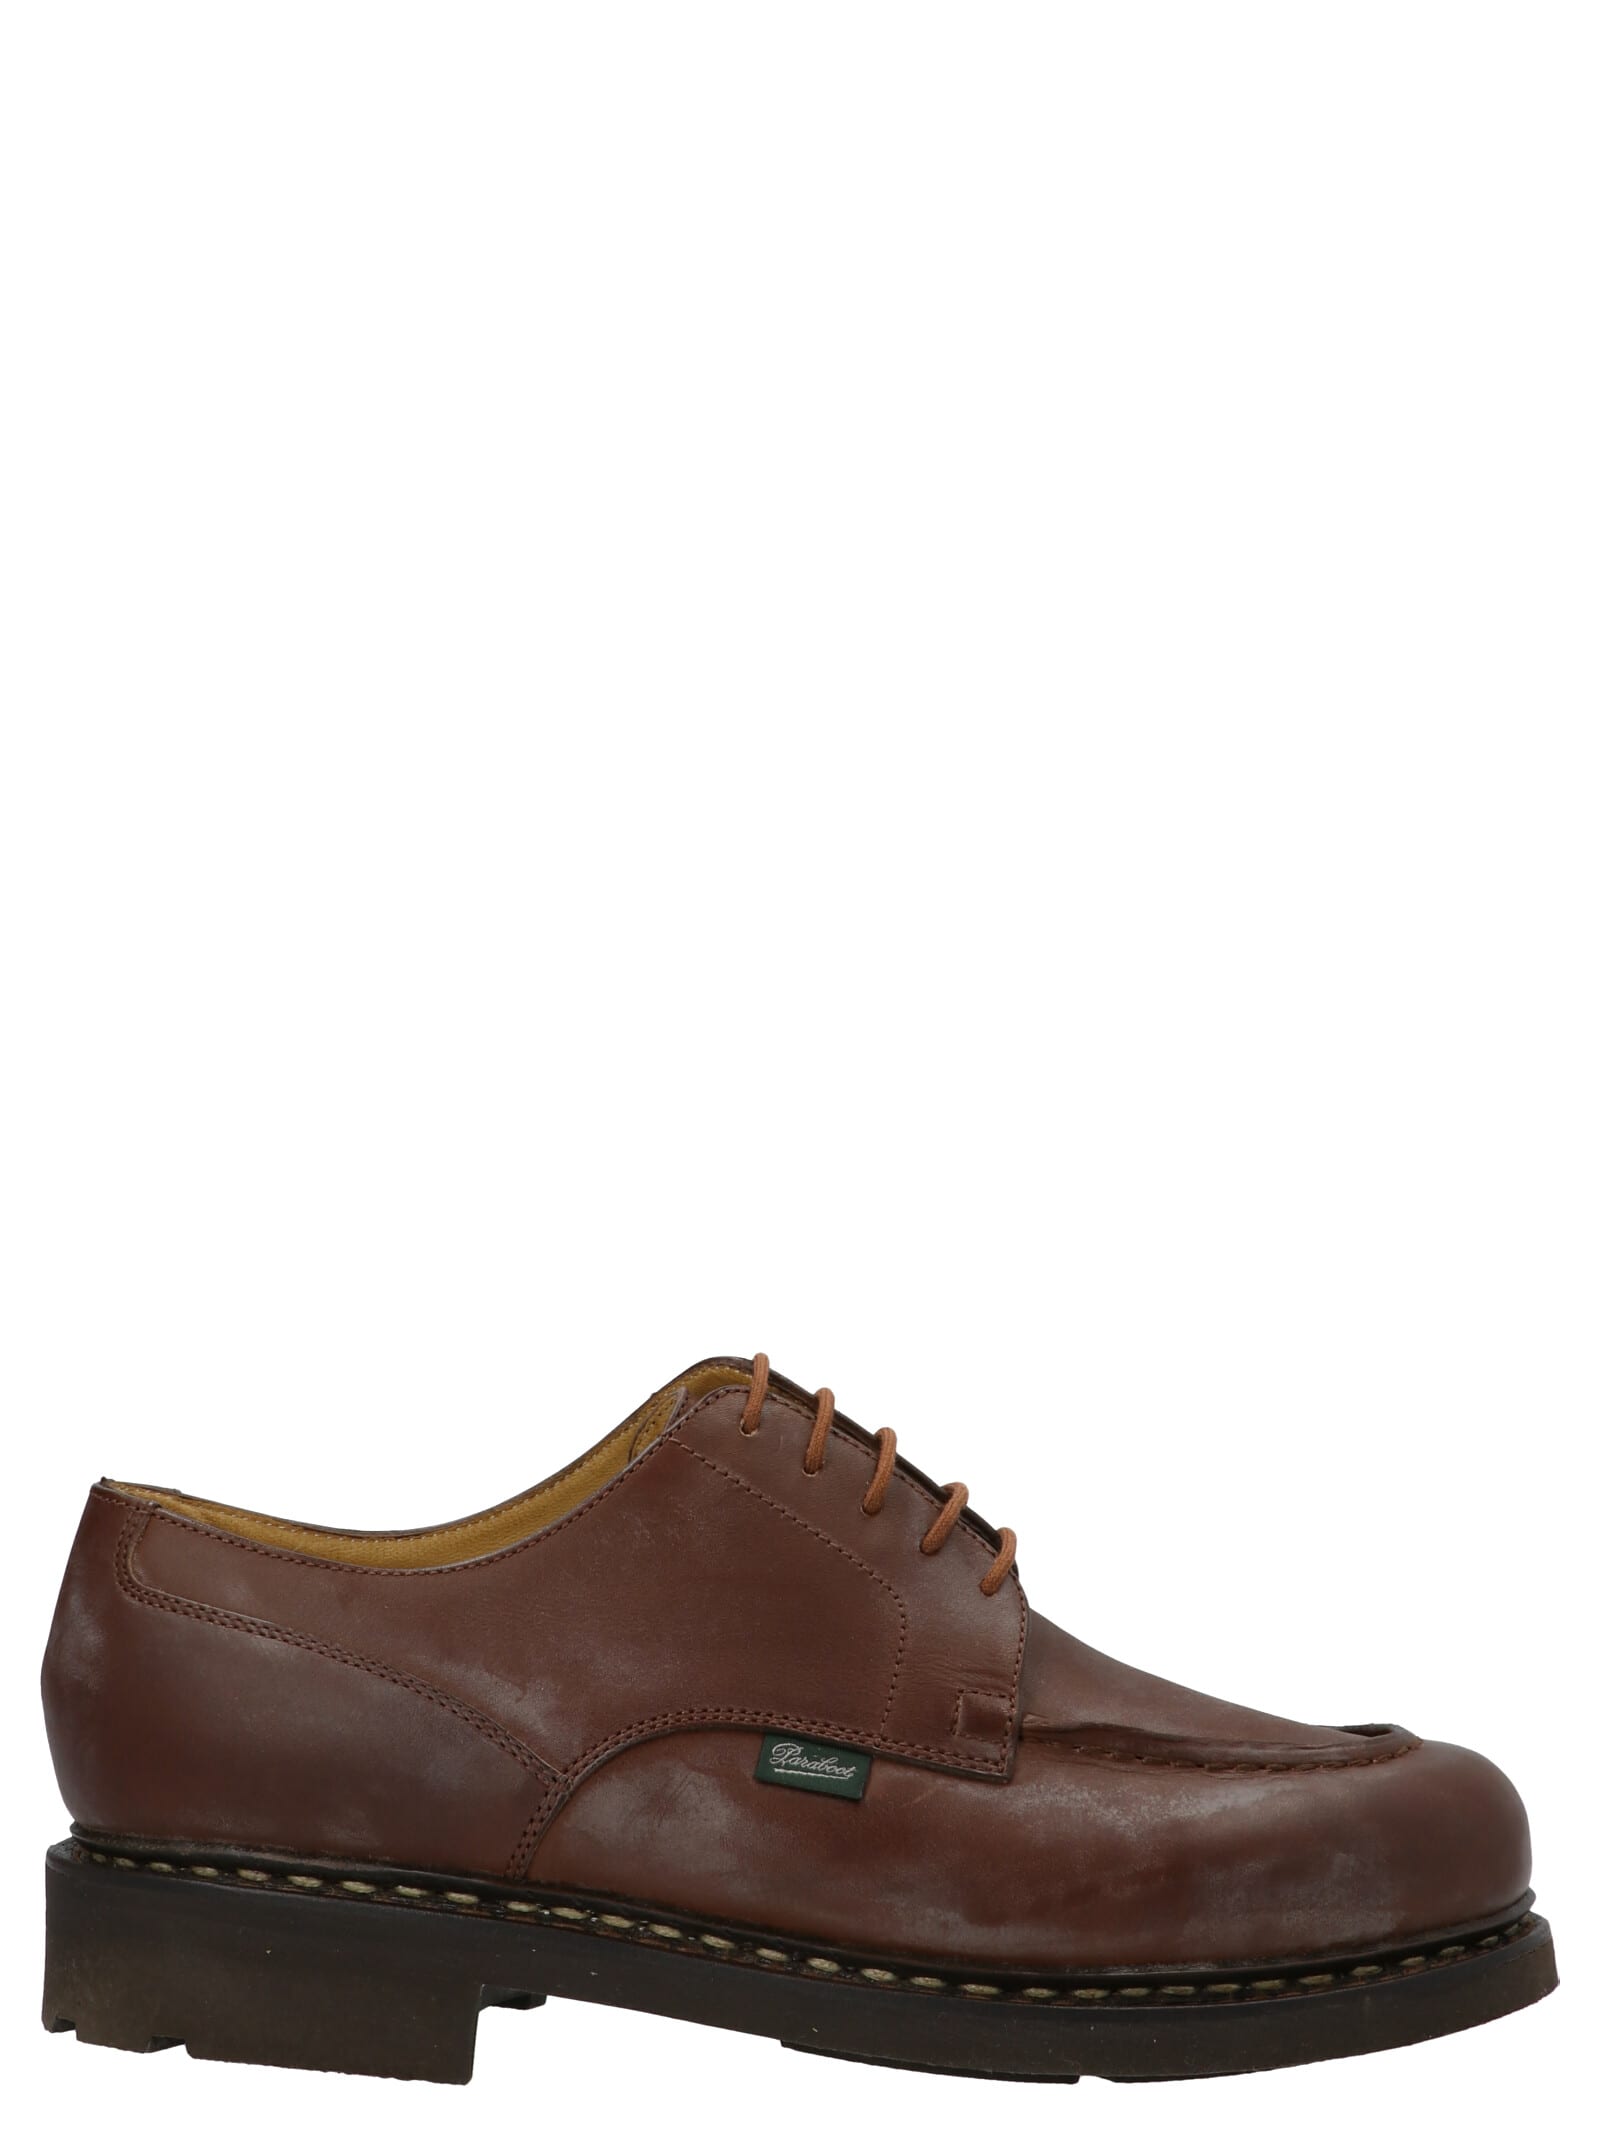 Paraboot chambord Derby Shoes